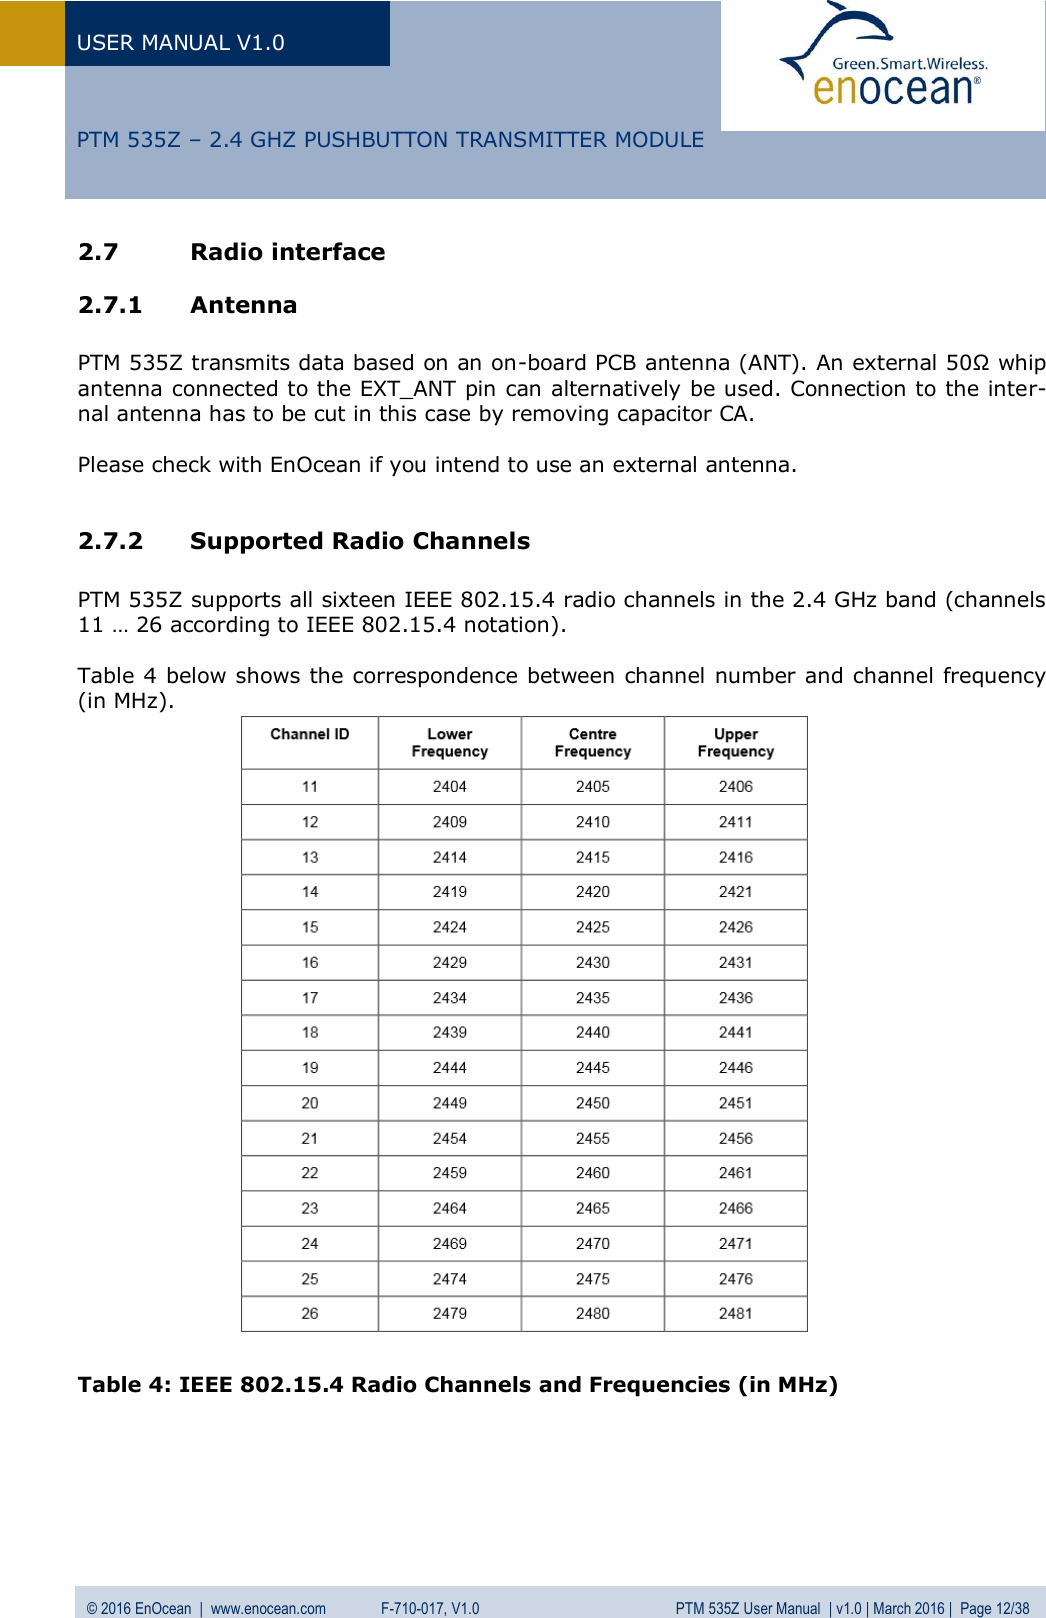 USER MANUAL V1.0   © 2016 EnOcean  |  www.enocean.com   F-710-017, V1.0          PTM 535Z User Manual  | v1.0 | March 2016 |  Page 12/38   PTM 535Z – 2.4 GHZ PUSHBUTTON TRANSMITTER MODULE 2.7 Radio interface 2.7.1 Antenna   PTM 535Z transmits data based on an on-board PCB antenna (ANT). An external 50Ω whip antenna connected to the EXT_ANT pin can alternatively be used. Connection to the inter-nal antenna has to be cut in this case by removing capacitor CA.   Please check with EnOcean if you intend to use an external antenna.   2.7.2 Supported Radio Channels  PTM 535Z supports all sixteen IEEE 802.15.4 radio channels in the 2.4 GHz band (channels 11 … 26 according to IEEE 802.15.4 notation).   Table 4 below shows the correspondence between channel number and channel frequency (in MHz).                           Table 4: IEEE 802.15.4 Radio Channels and Frequencies (in MHz)    